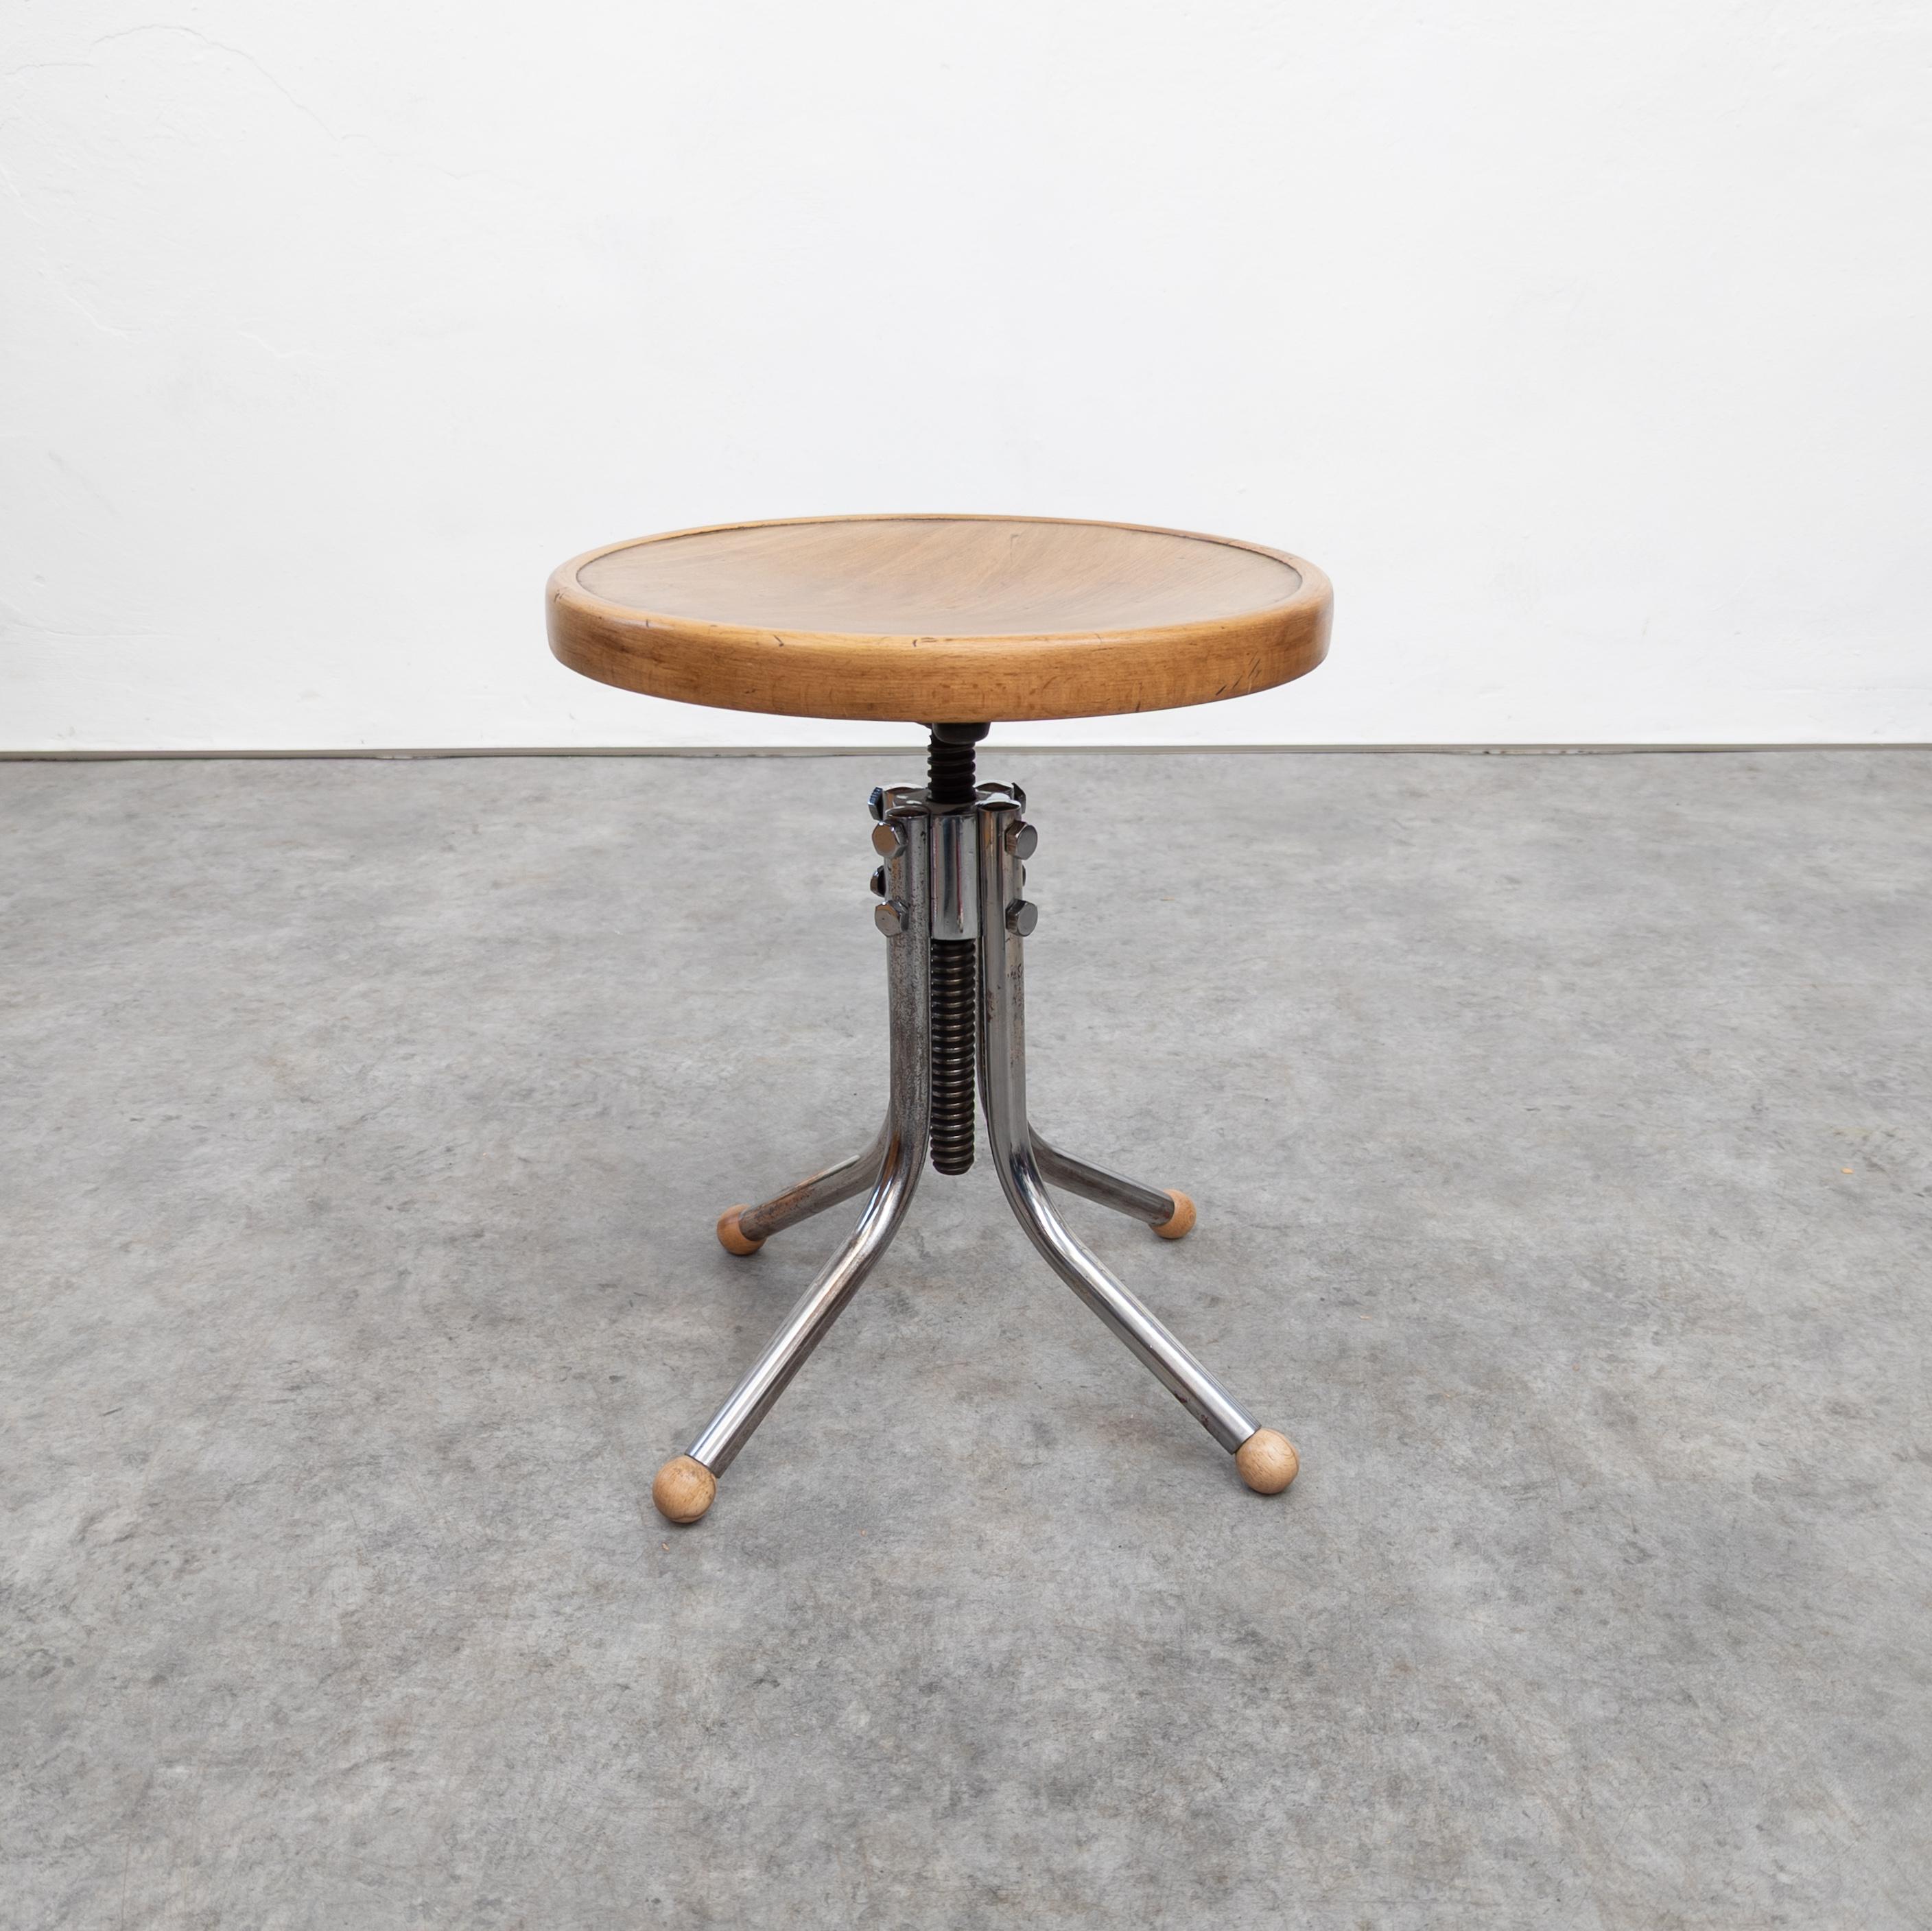 Czech A rare variant of stool mod. no. B 195, designed by Marcel Breuer For Sale